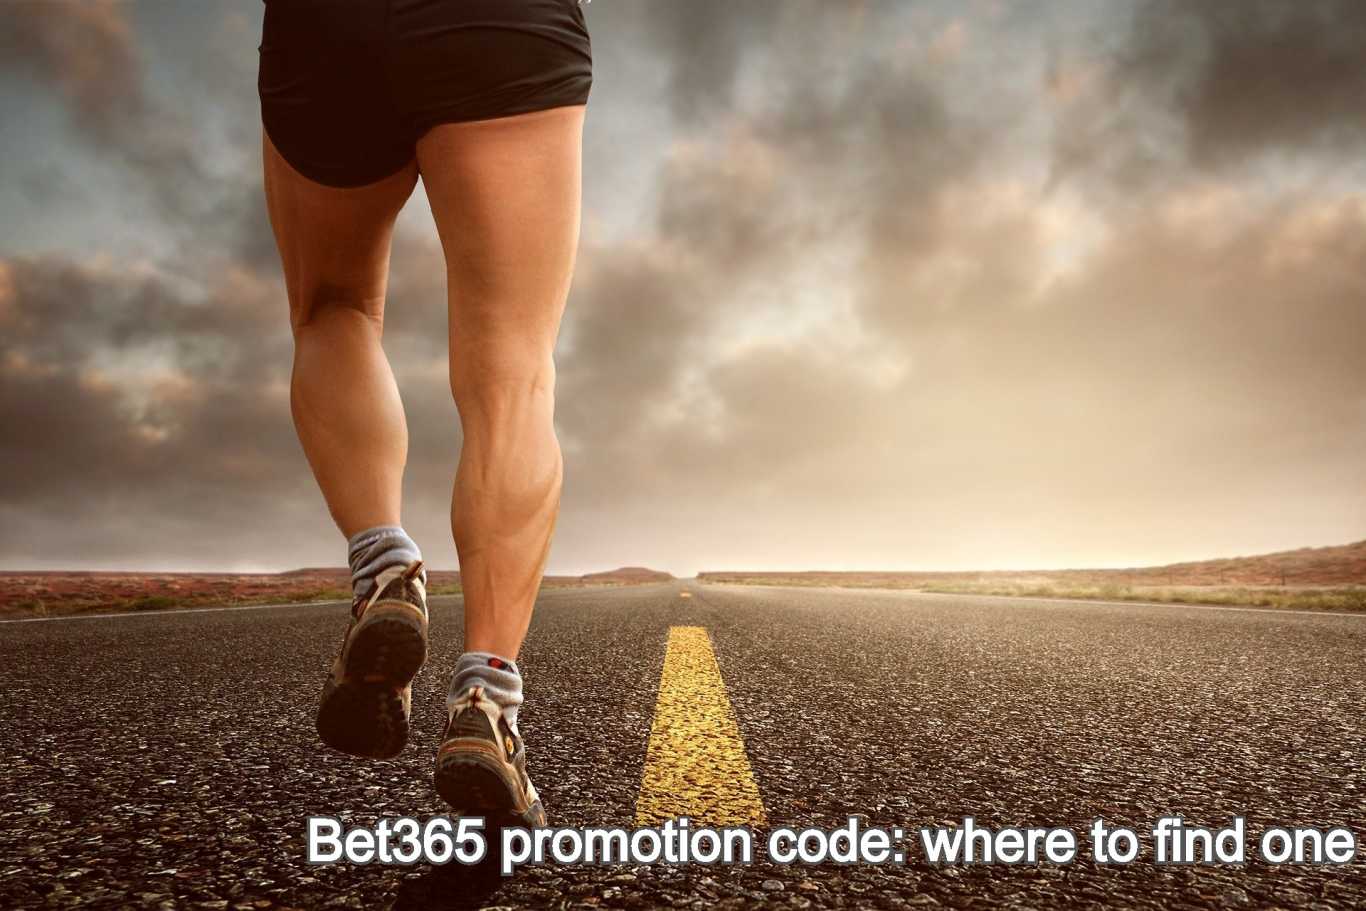 Bet365 promotion code: where to find one